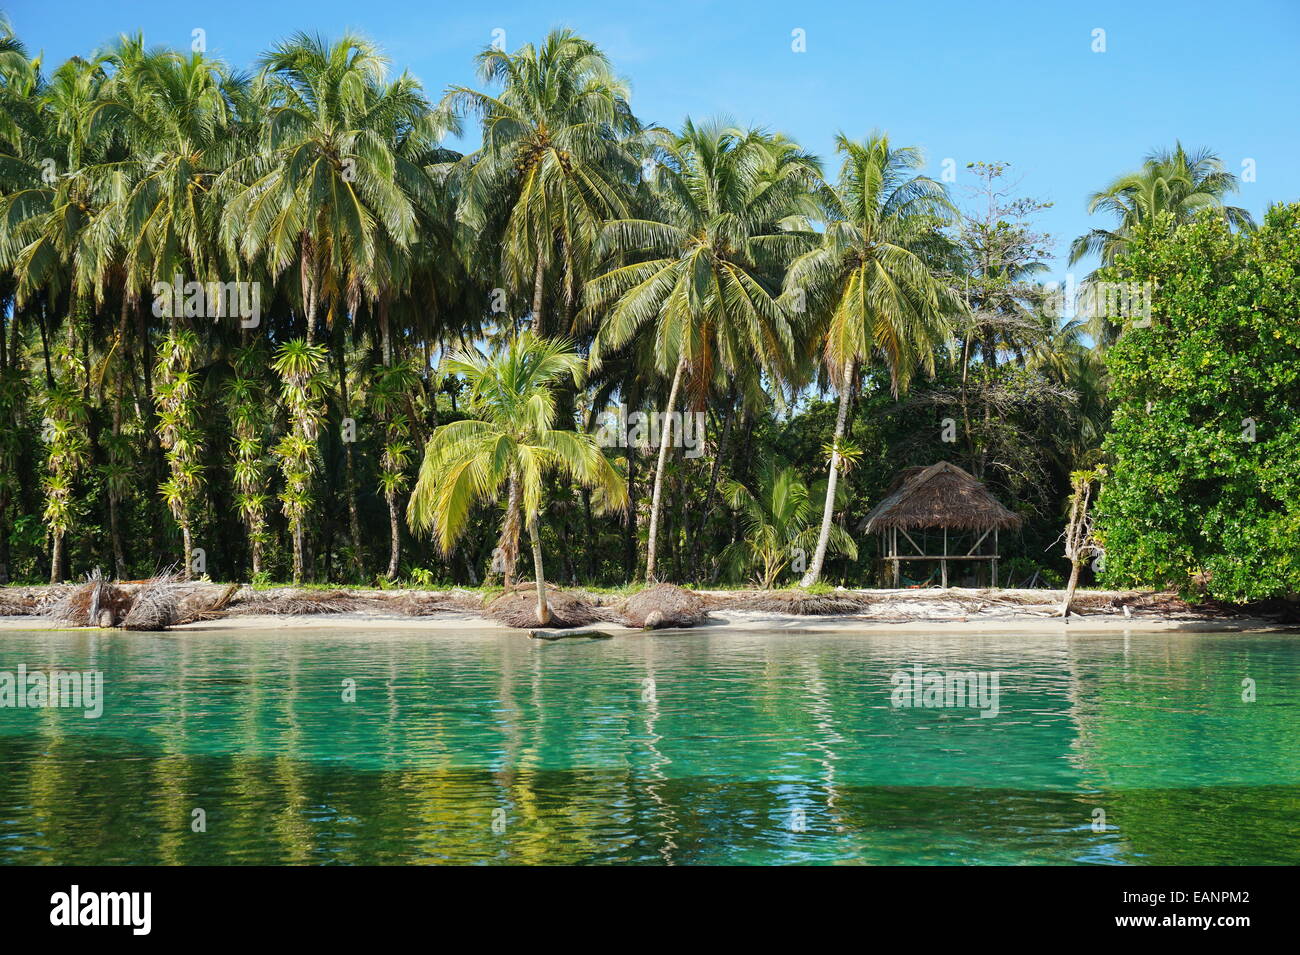 Tropical shore with lush coconut trees and a thatched hut, Caribbean, Zapatillas islands, Bocas del Toro, Panama Stock Photo